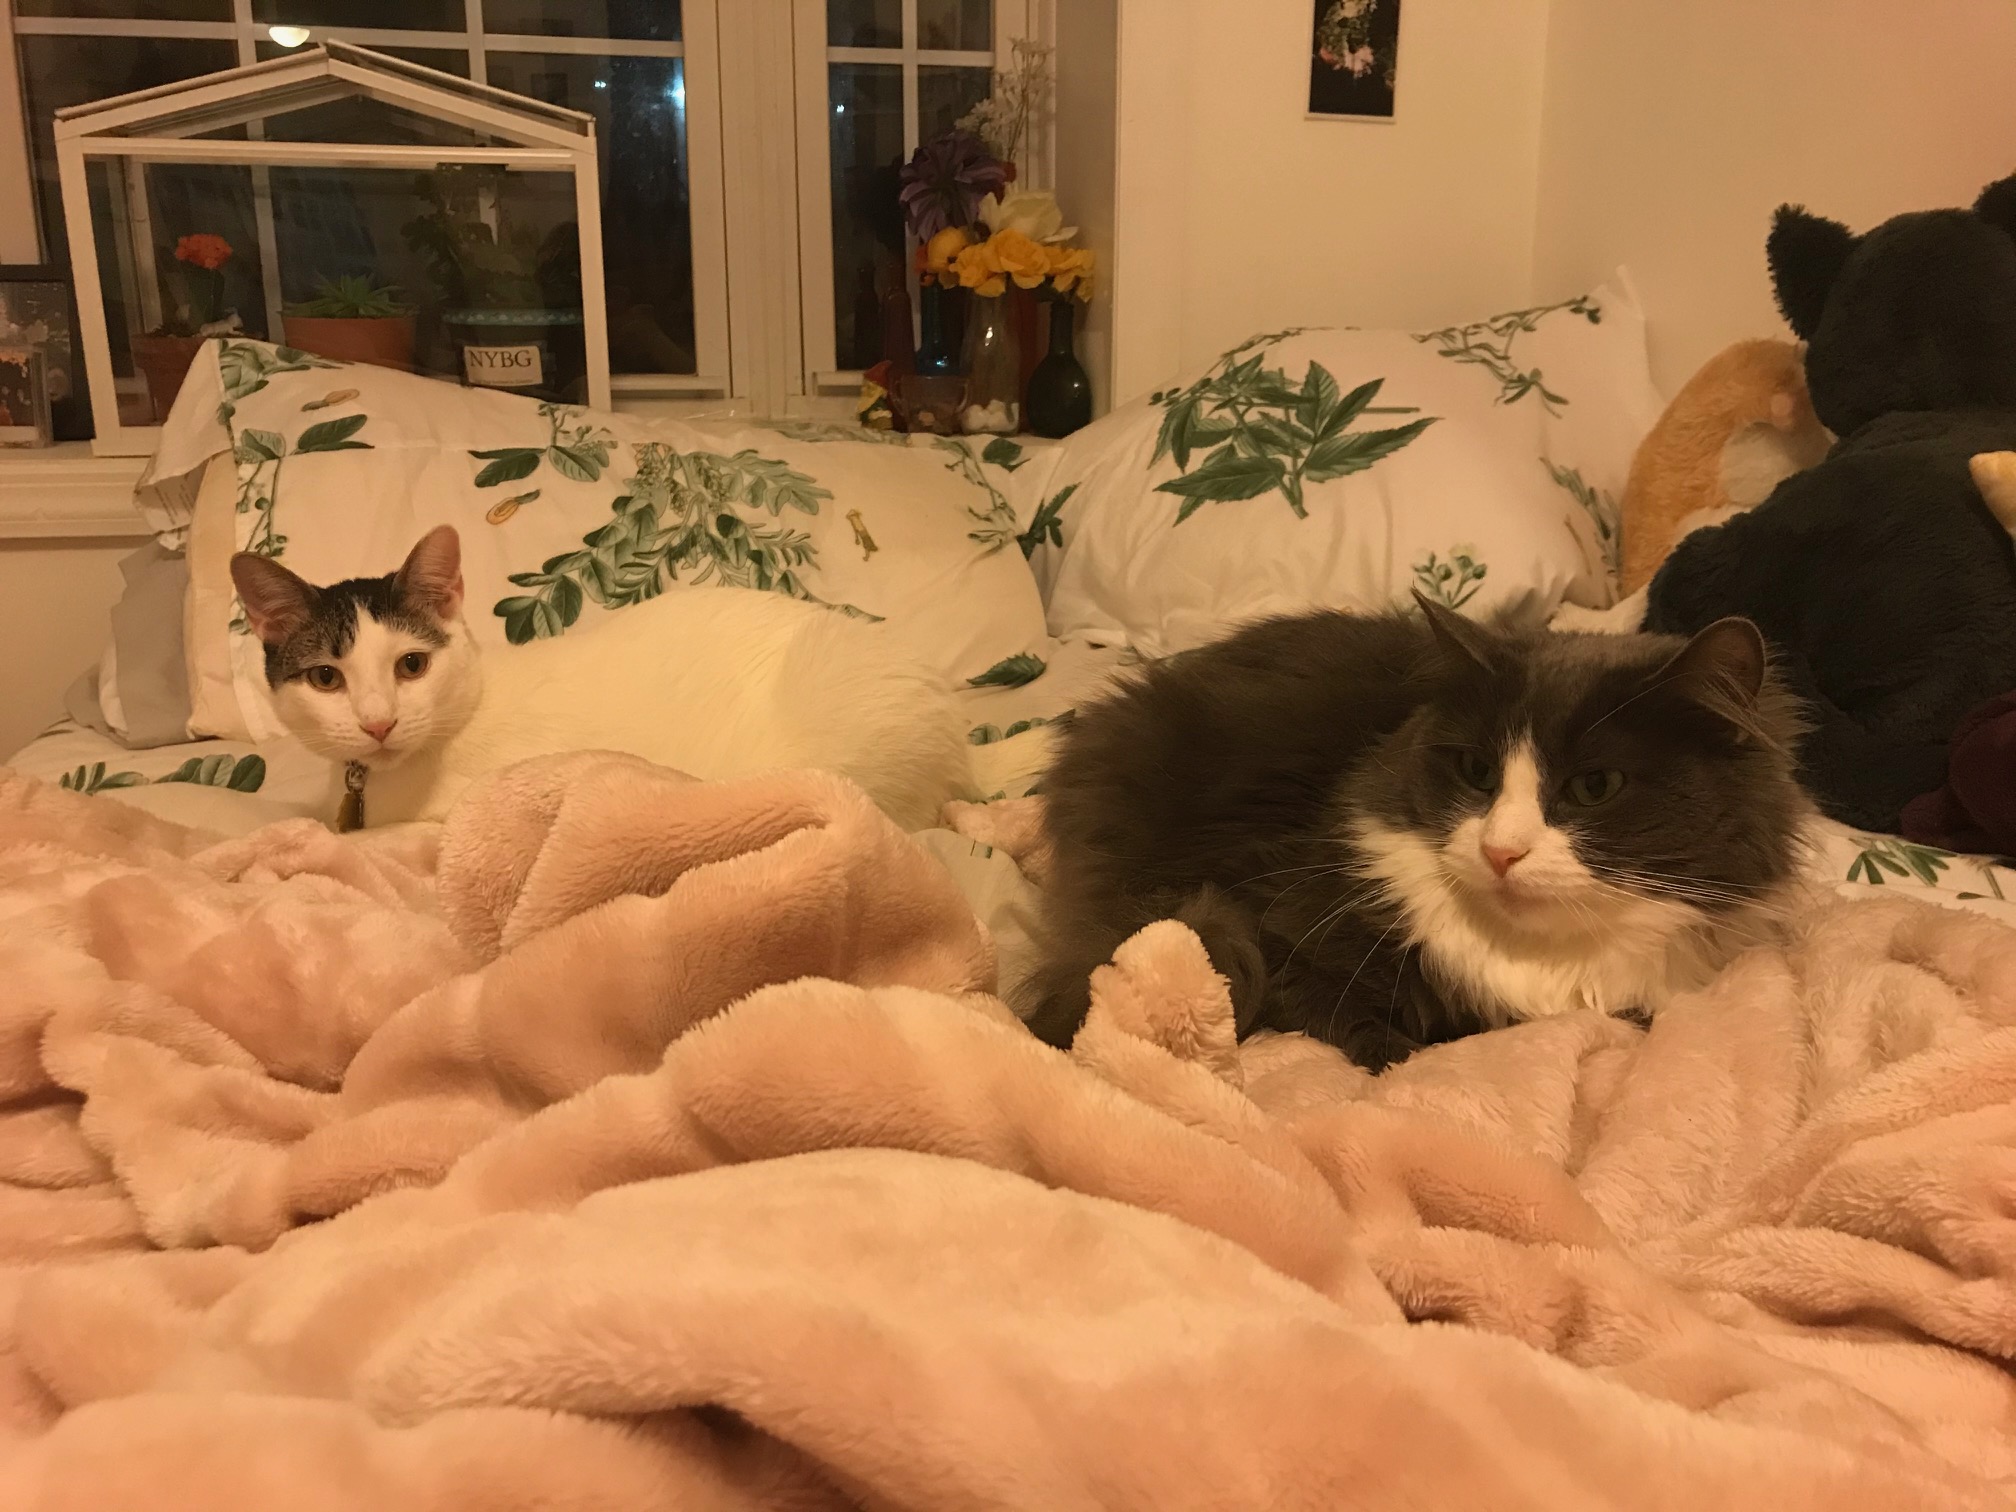 A gray-and-white cat and a white cat with tabby splotches lay next to each other on a pink blanket.